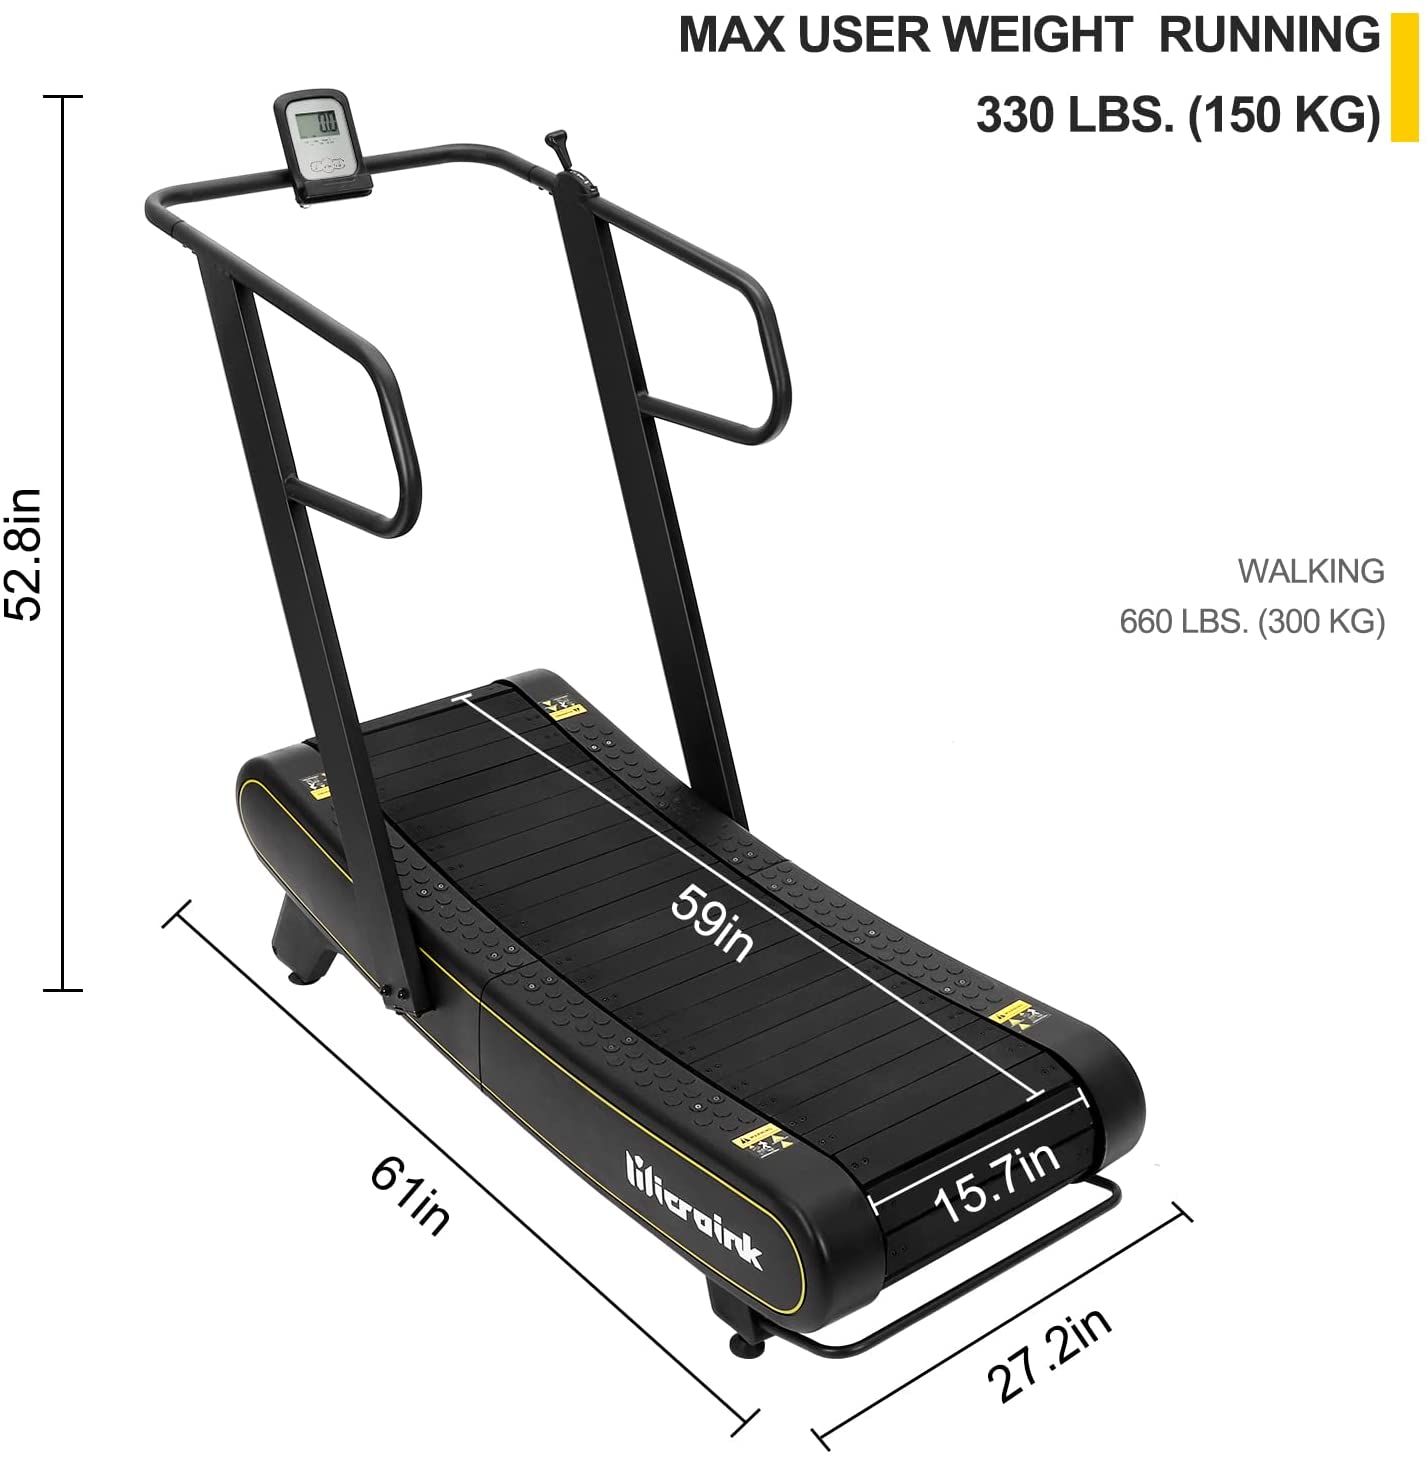 Microink curved manual treadmill sizes